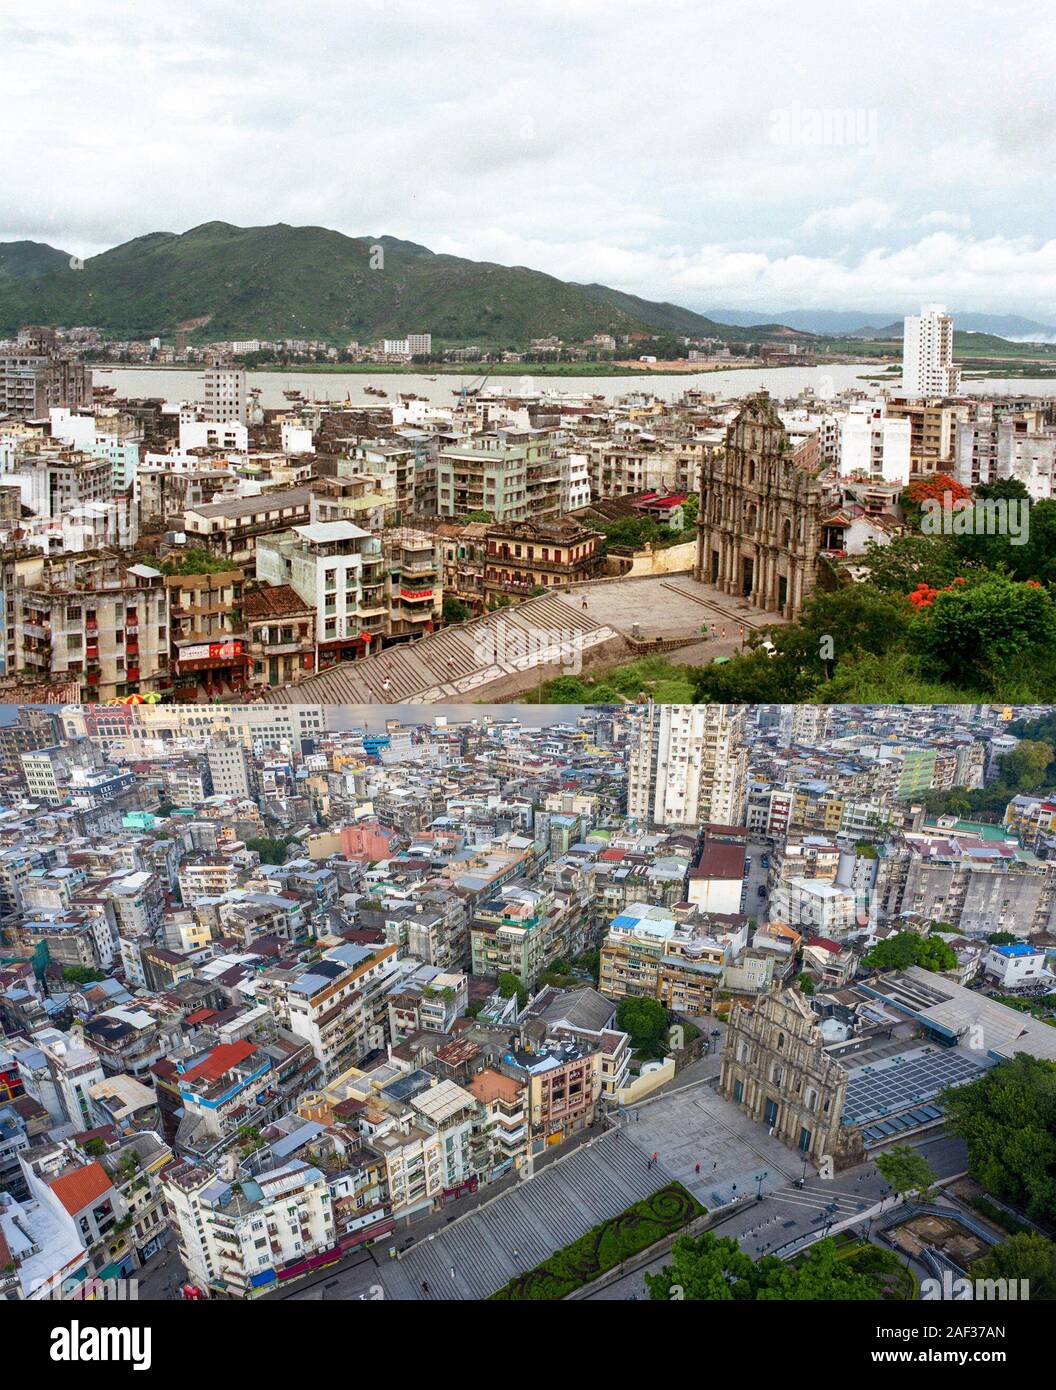 (191212) -- BEIJING, Dec. 12, 2019 (Xinhua) -- This combination photo shows an aerial view of the Ruins of St. Paul's complex and its surroundings in Macao, south China (top, photo by Chen Demu, archived on Nov. 7, 1986) and an aerial view of the same area on Oct. 24, 2019 (bottom, photo by Cheong Kam Ka).  On Dec. 20, Macao will celebrate the 20th anniversary of its return to motherland. Over the past two decades, the special administrative region has made great strides in economic development and achieved prosperity and stability under the 'one country, two systems' principle.    Since Dec. Stock Photo